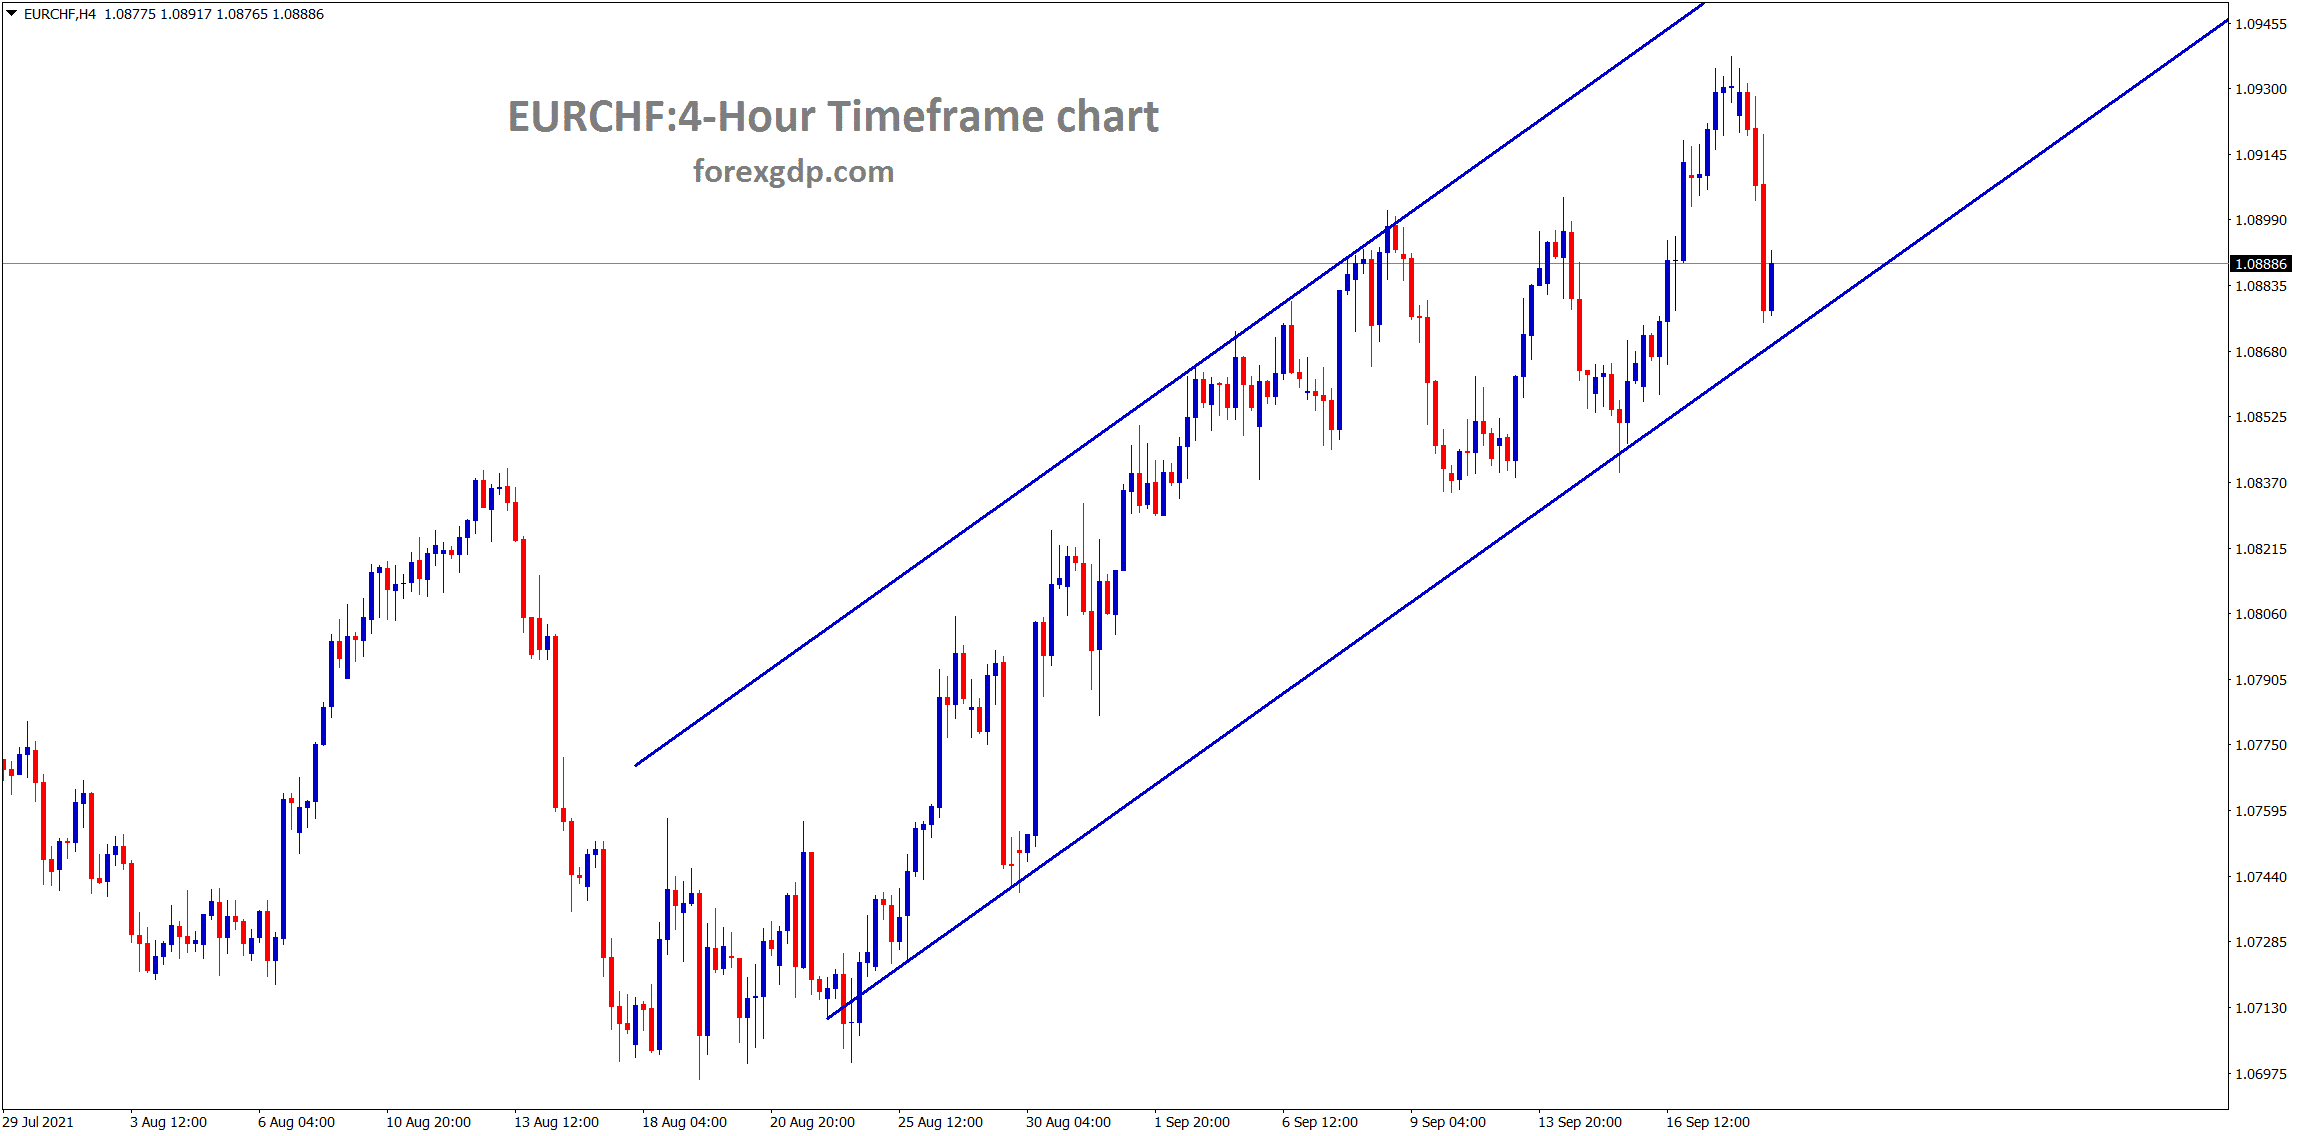 EURCHF is moving in an uptrend line in the hourly timeframe